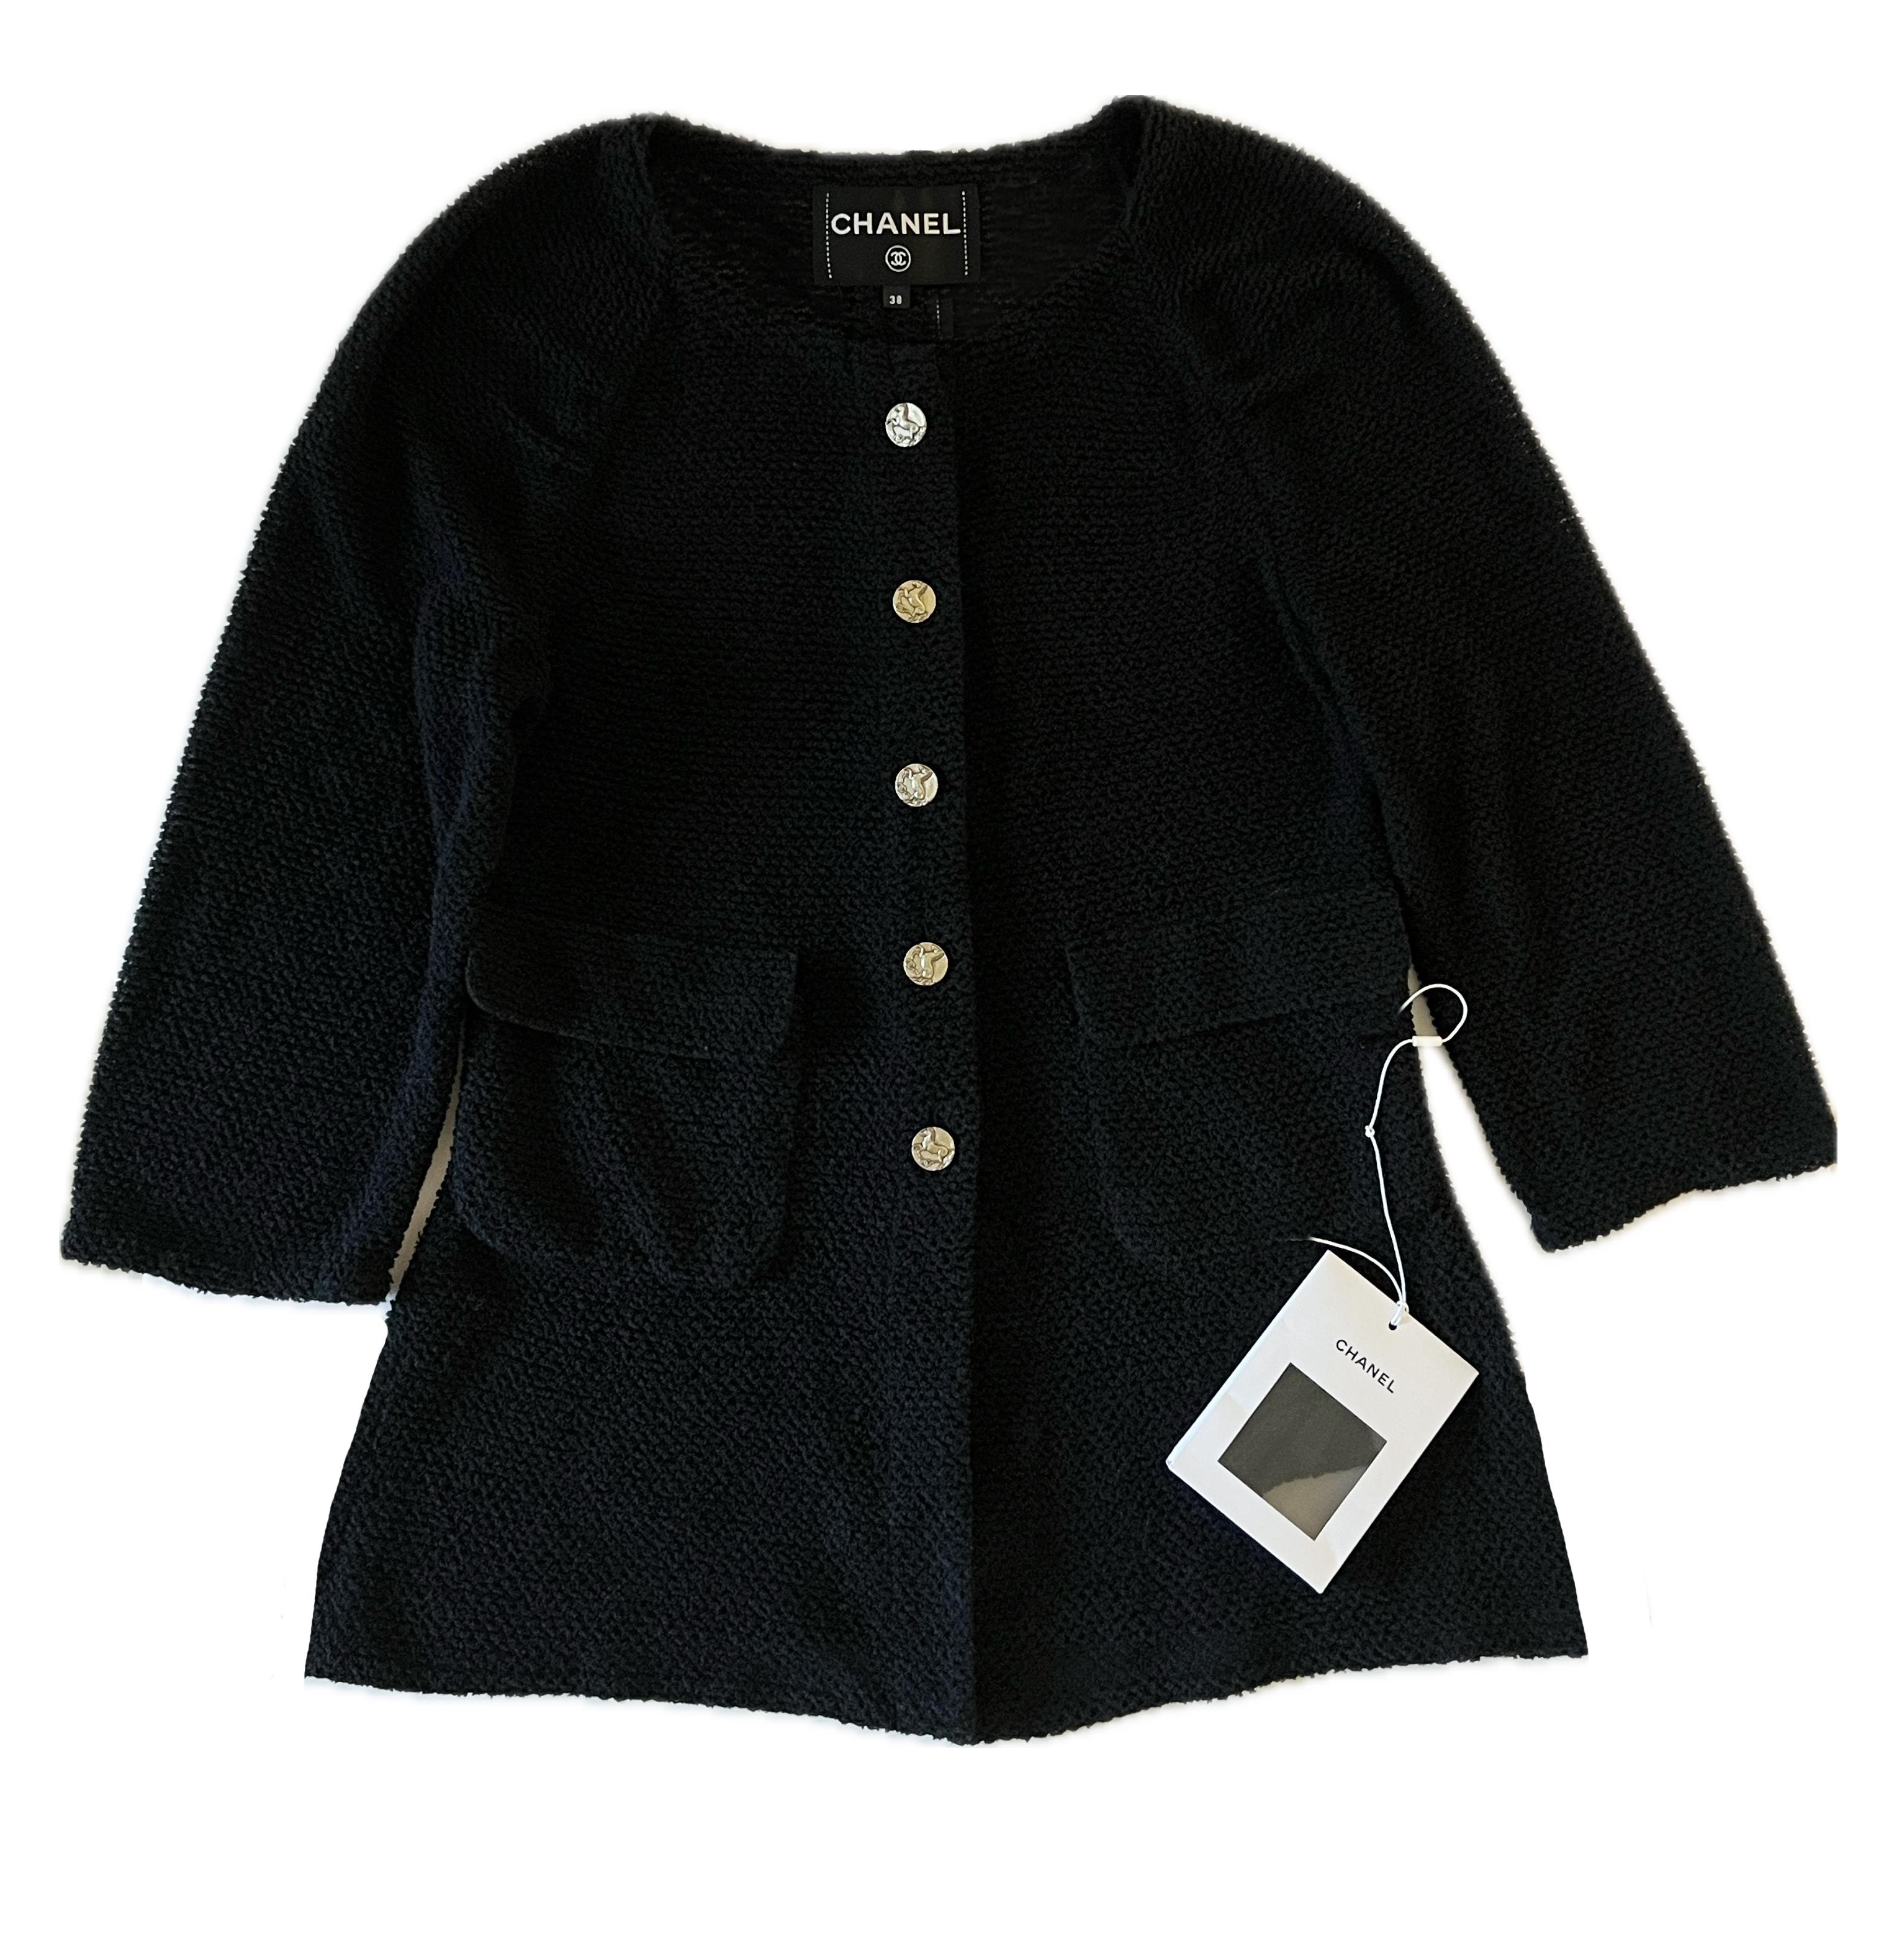 New timeless Chanel black tweed jacket from Paris / Ancient GREECE Cruise Collection
- CC logo antique buttons
Size mark 38 FR. Comes with pouch with extra cloth swatch.